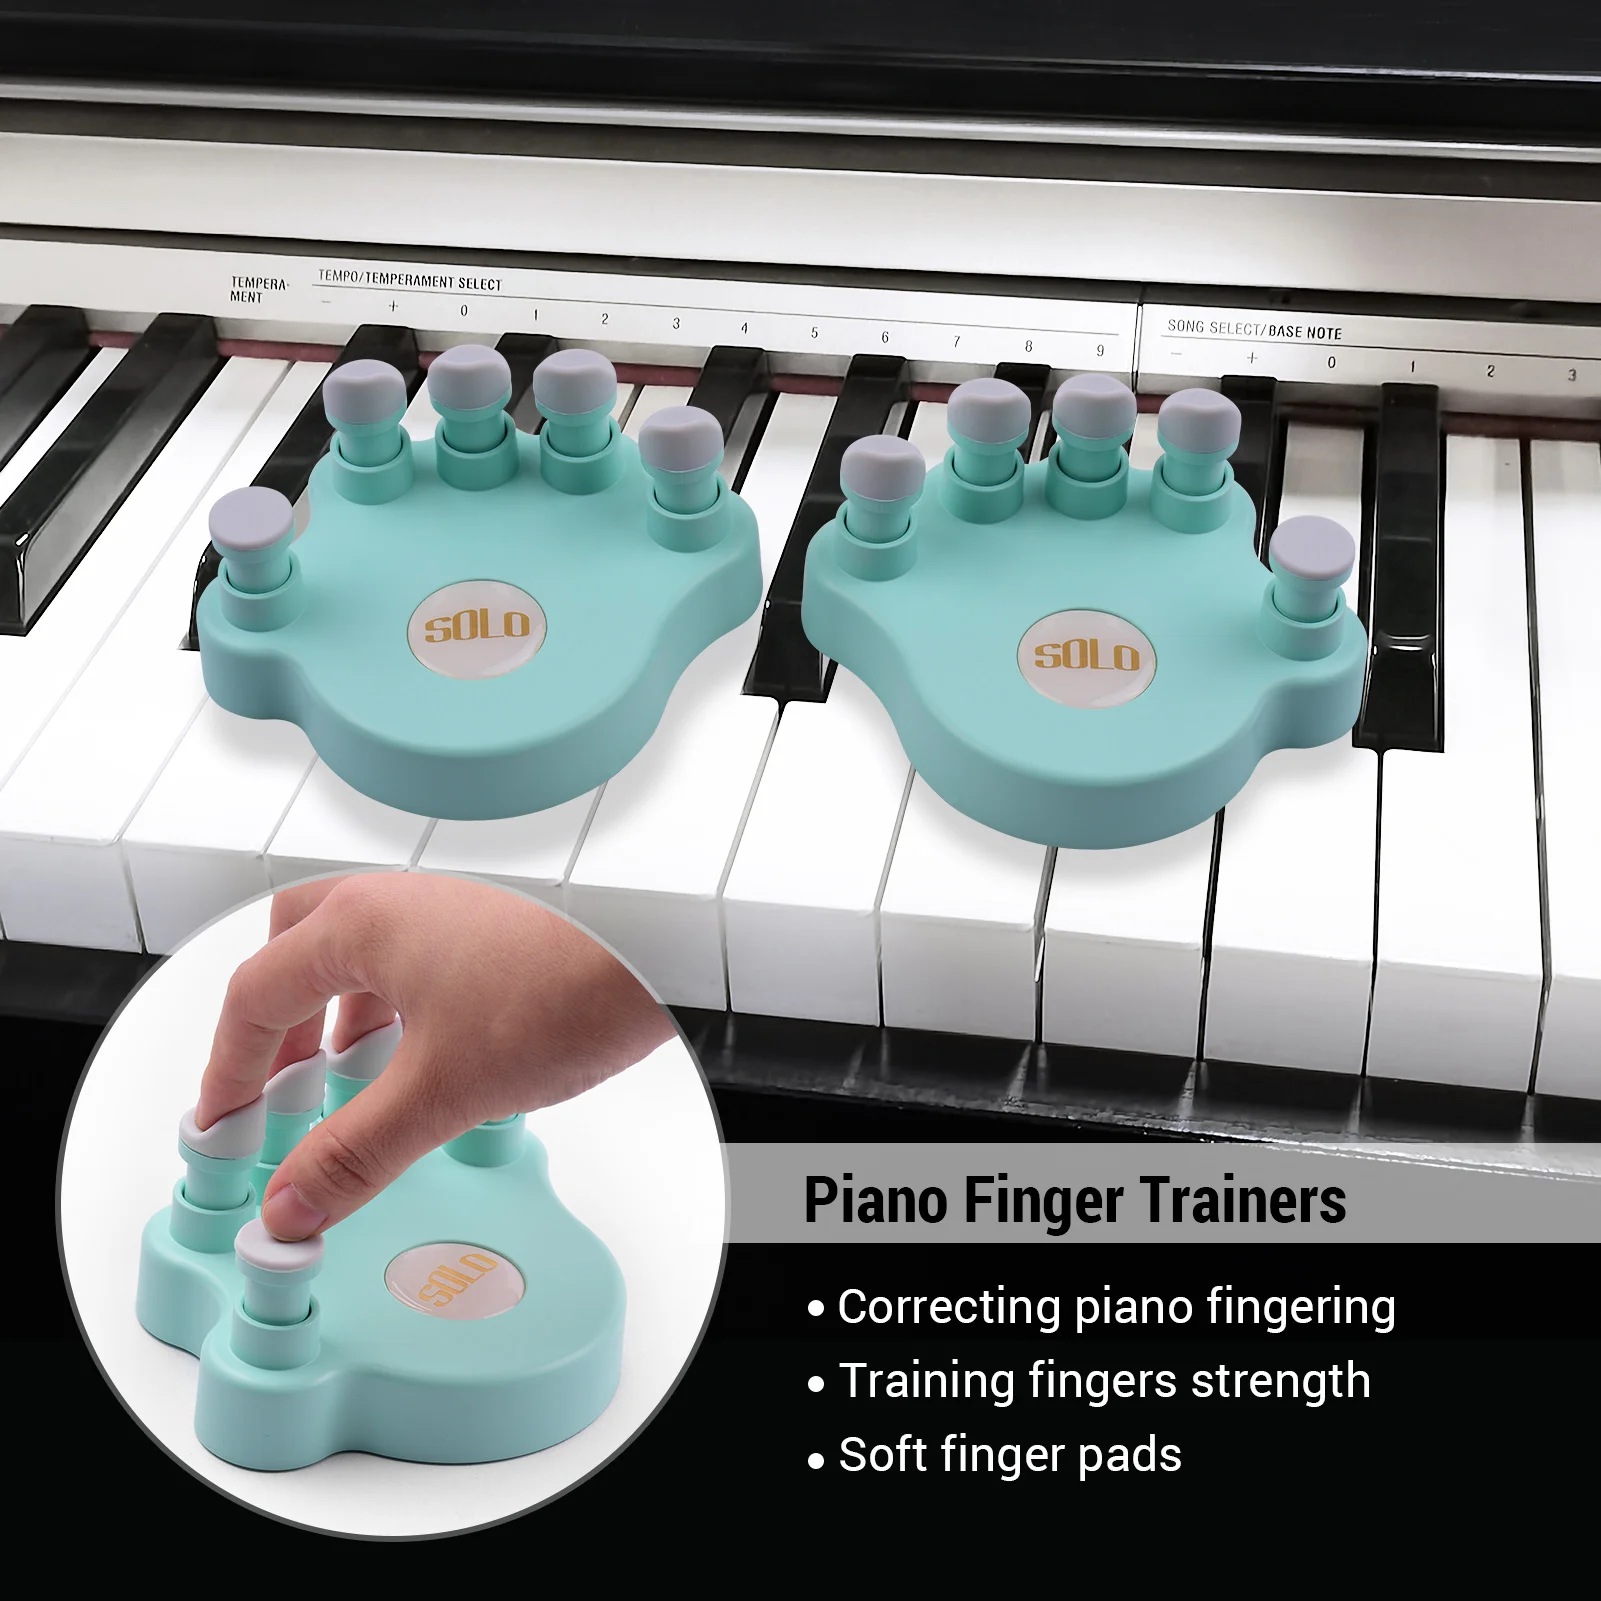 

SOLO SP-140 Piano Finger Trainers Fingers Strength Training Tools Finger Correctors for Piano Beginners, 1 Pair/Pack